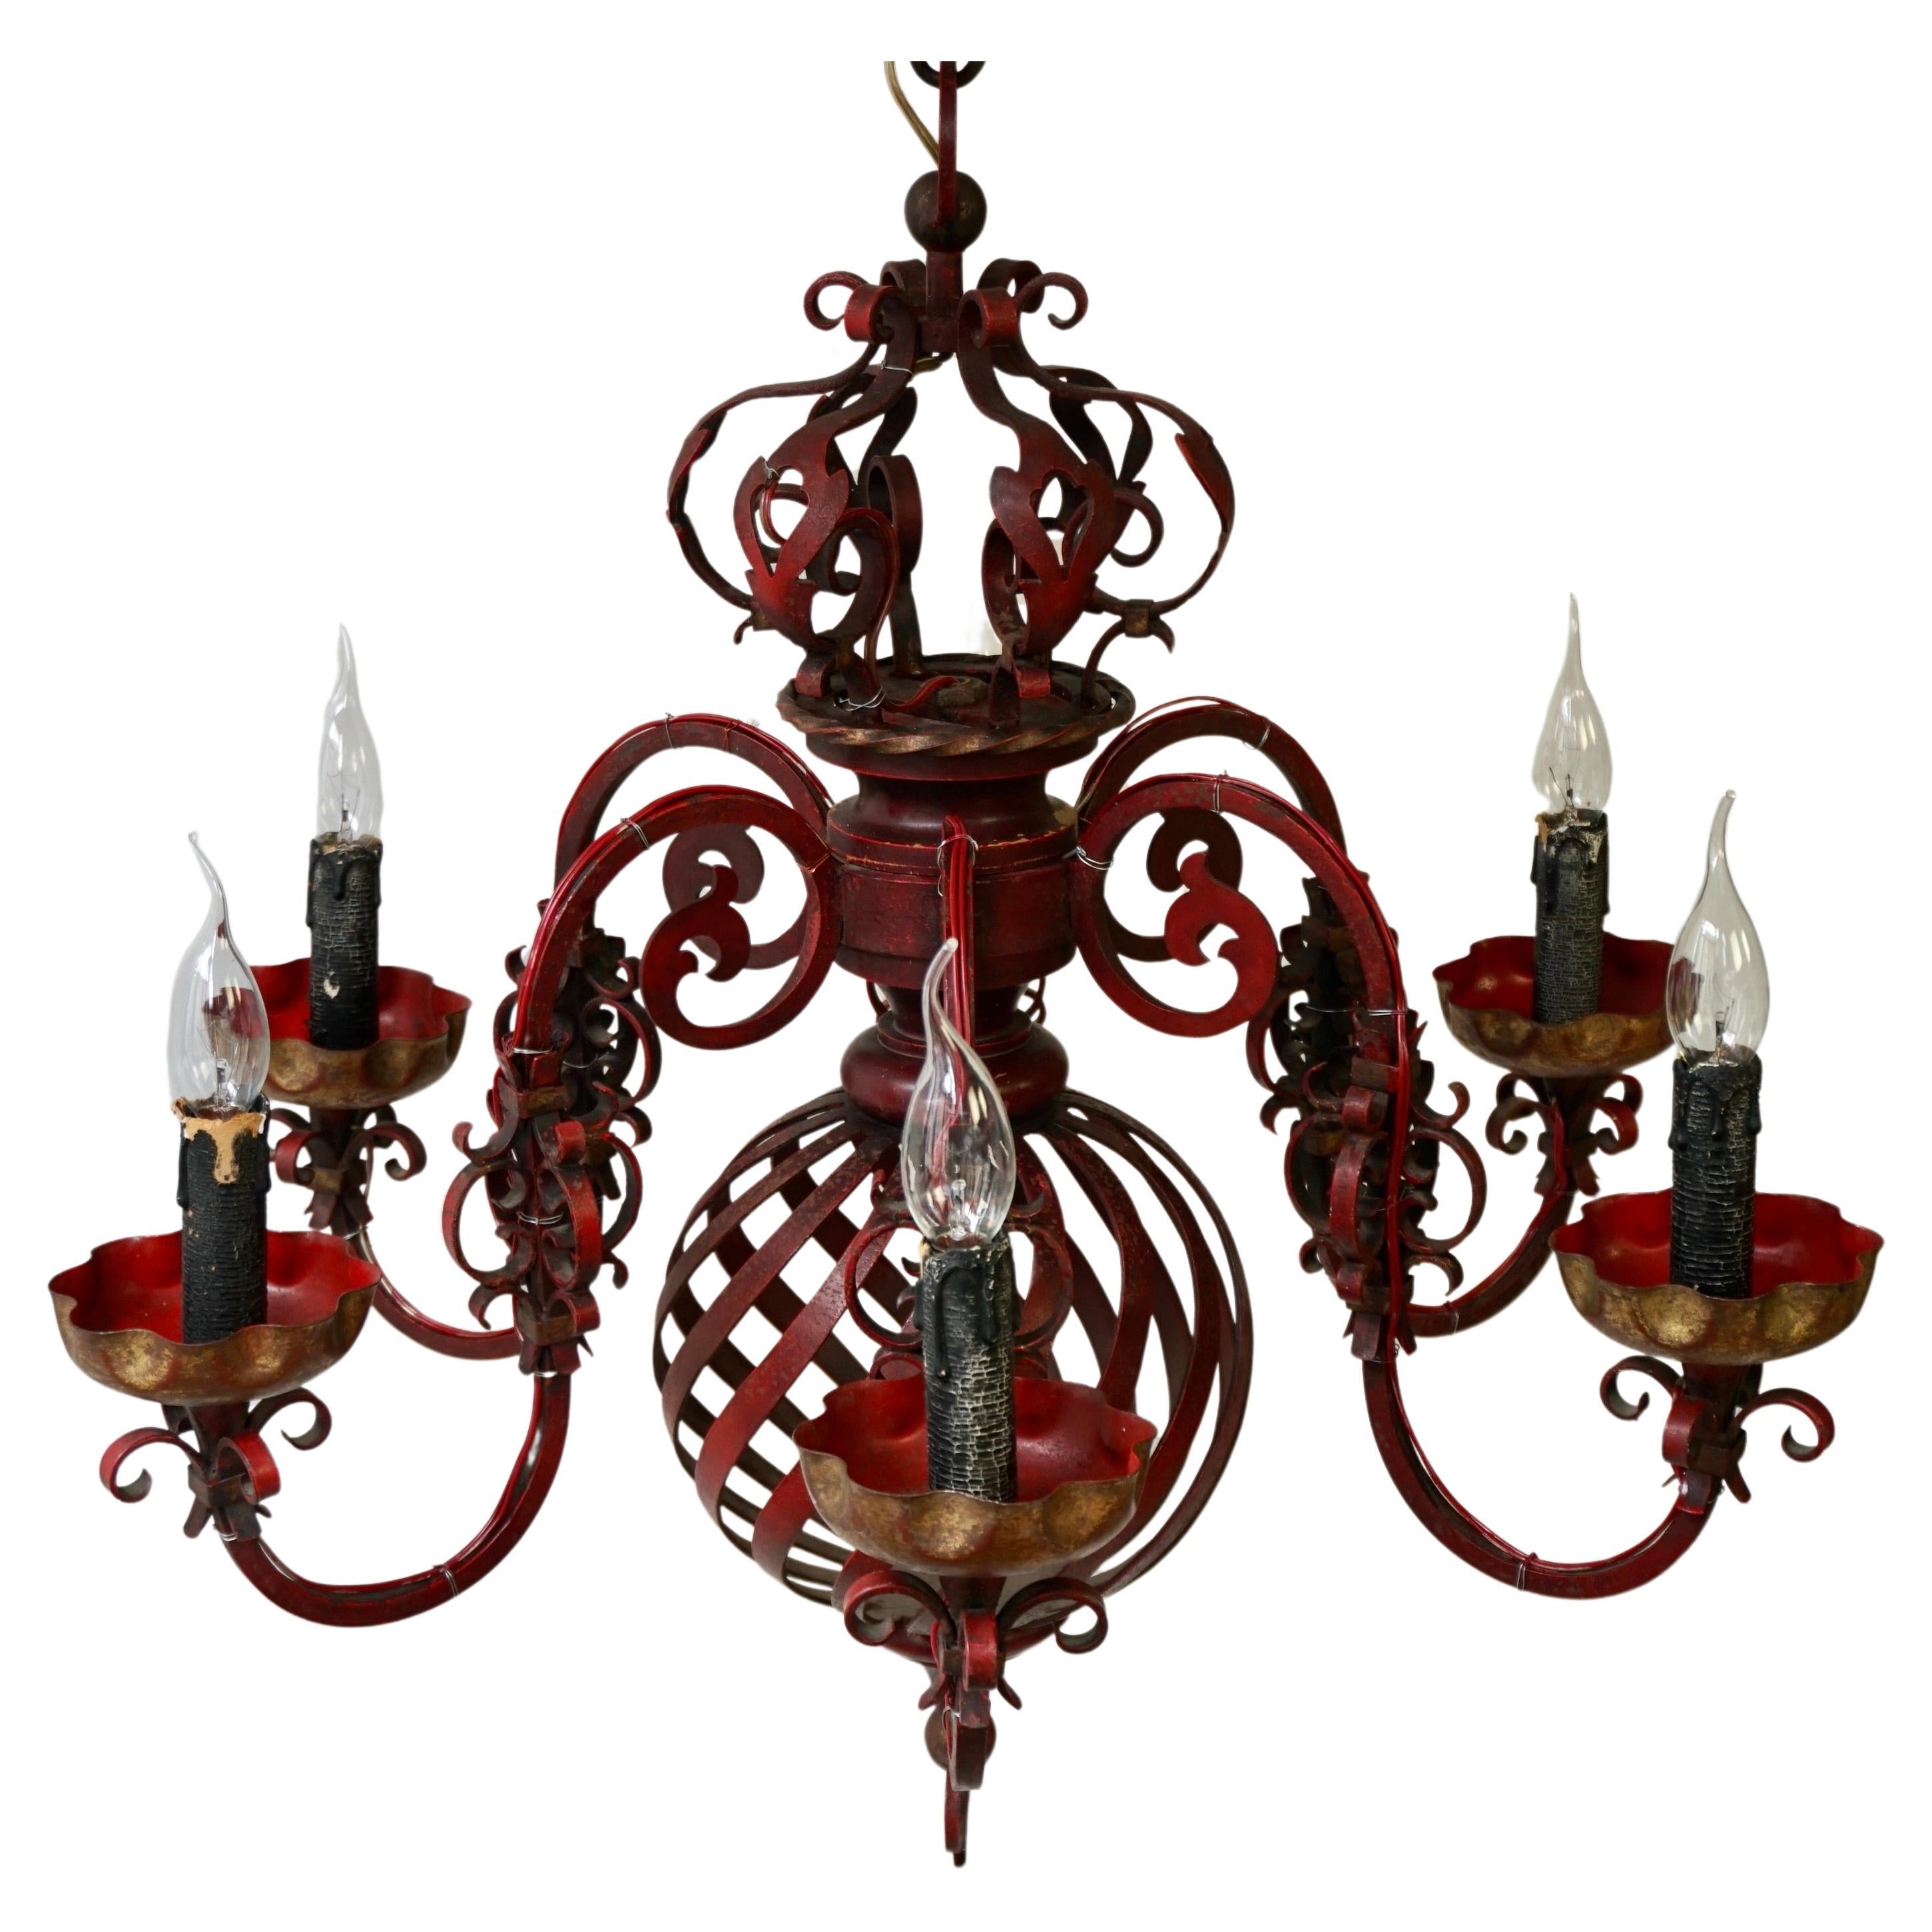 French red wrought iron chandelier with crown has six candelabra arms with gilt on each arm. This wonderful chandelier is suspended by original chain. This chandelier would work beautiful over a pool table, kitchen island, dining table, bar, or